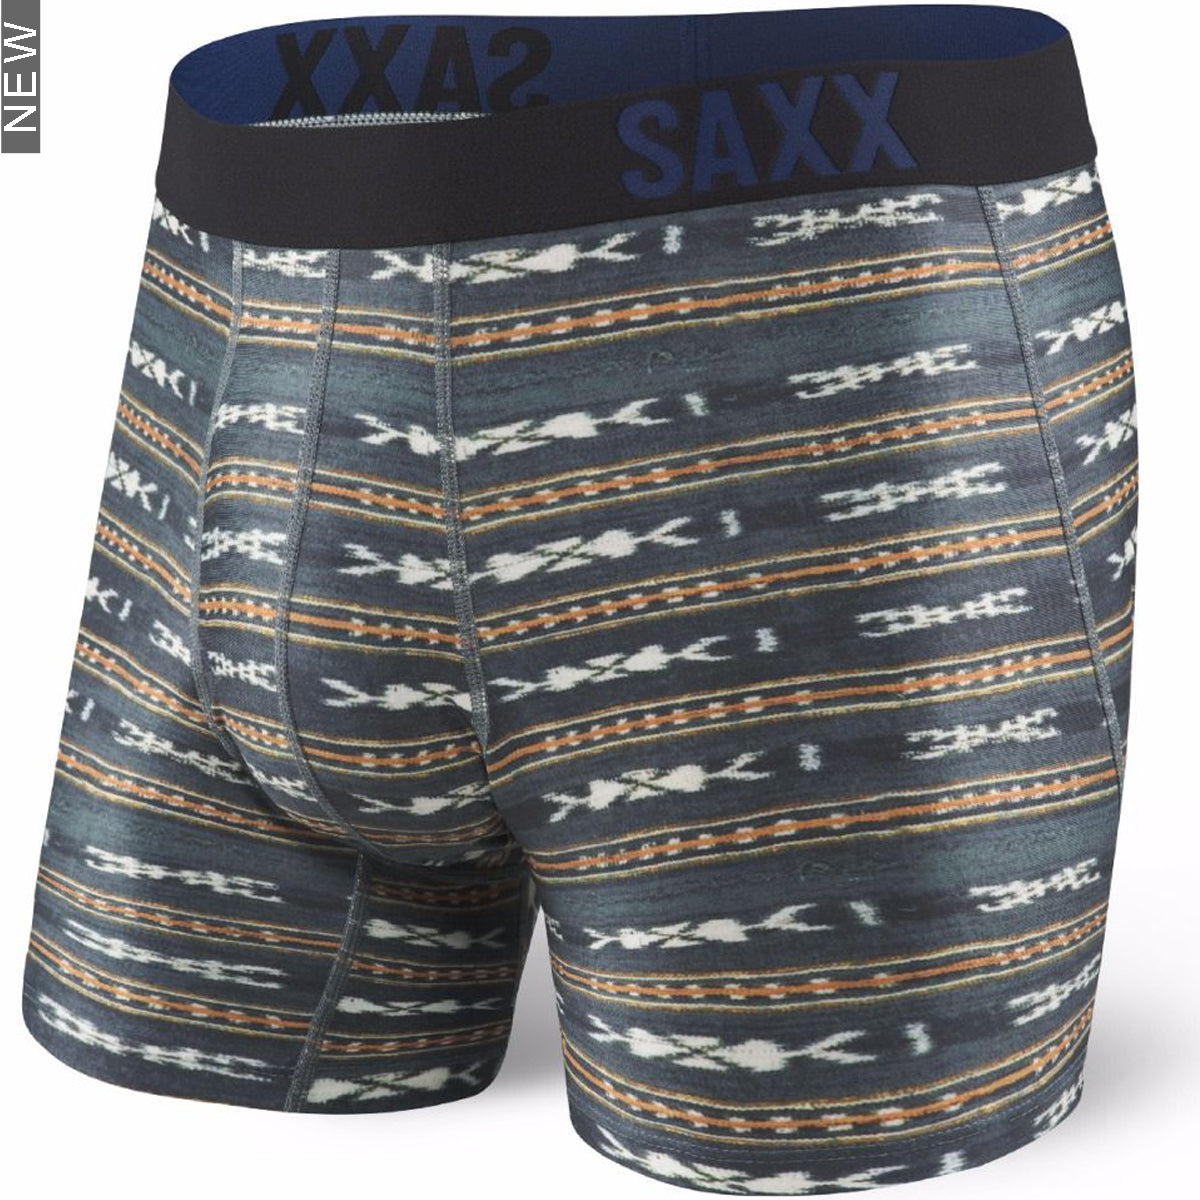 SAXX Fall 2017 All Day Everyday Comfort Underwear Apparel Collection –  OriginBoardshop - Skate/Surf/Sports